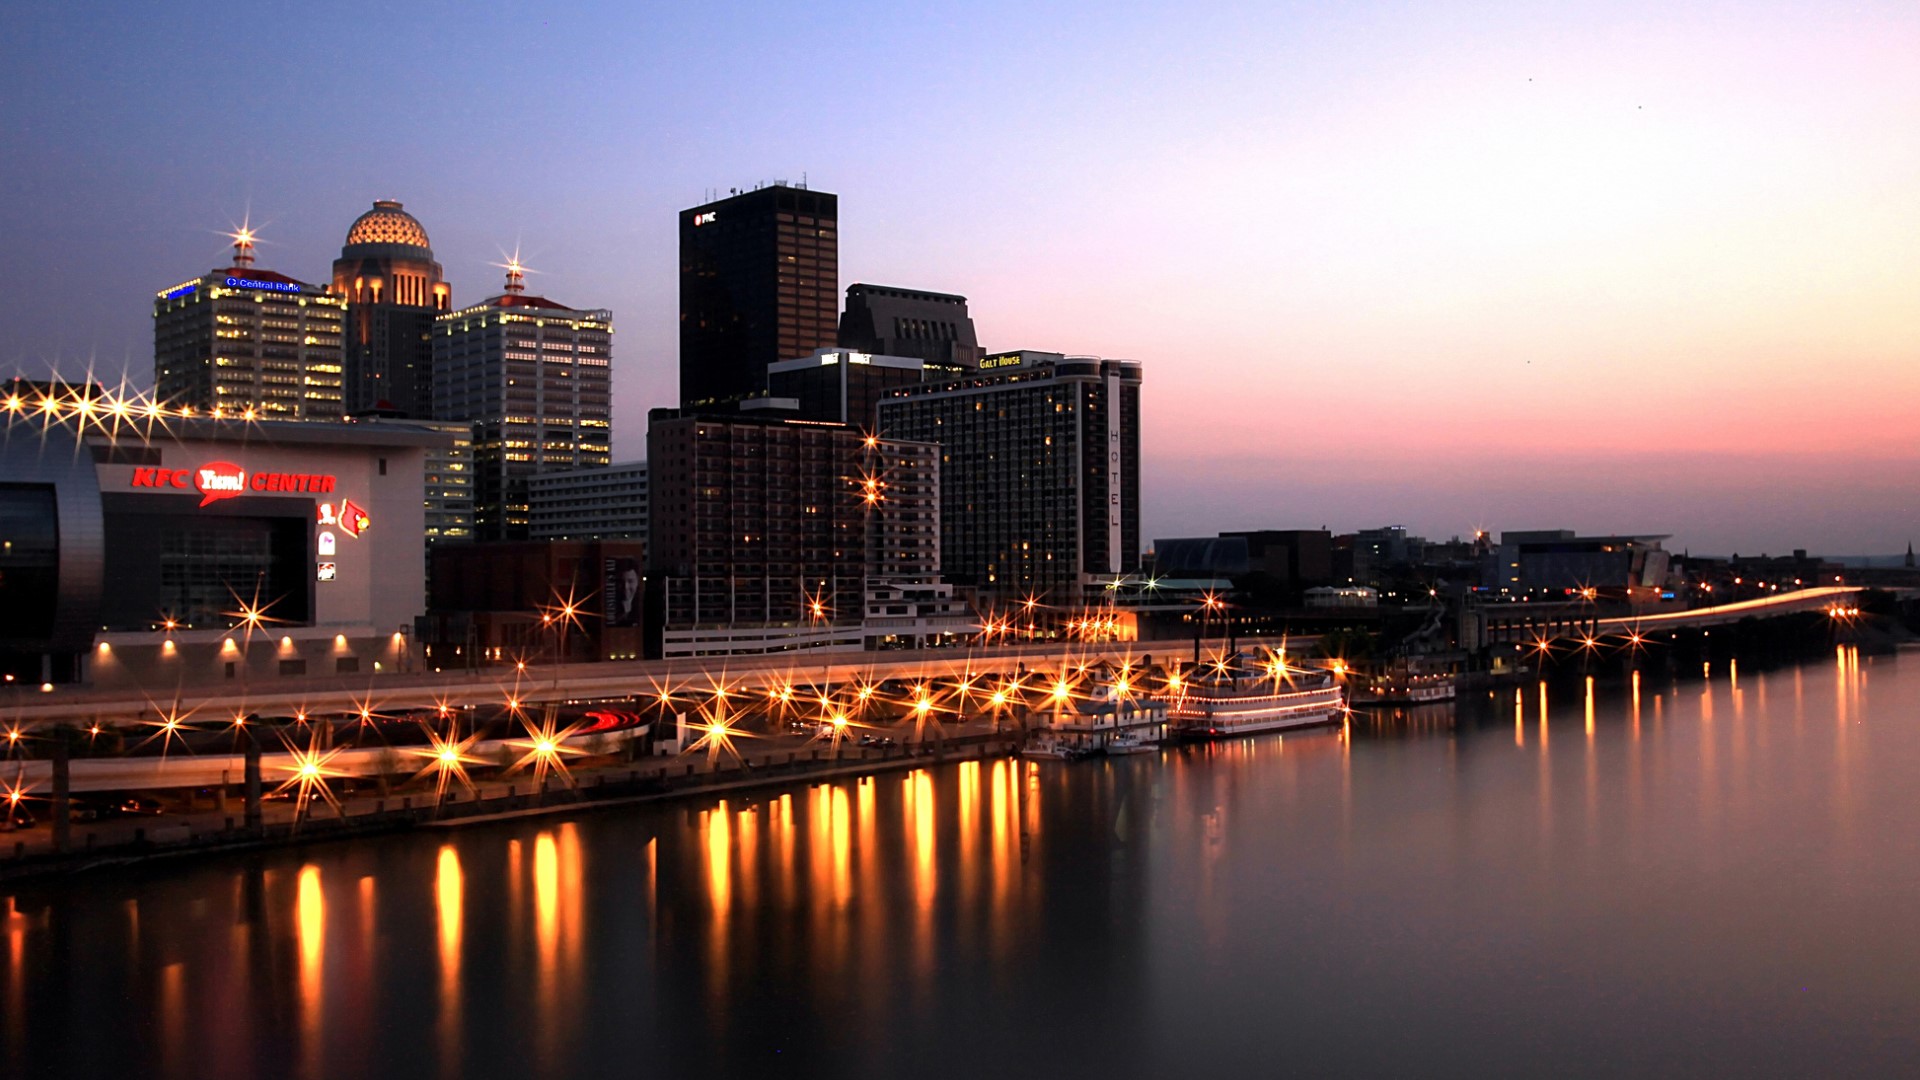 According to RedFin, Louisville's net flow has increased by 113% from last year. Which translate to a growing economy.